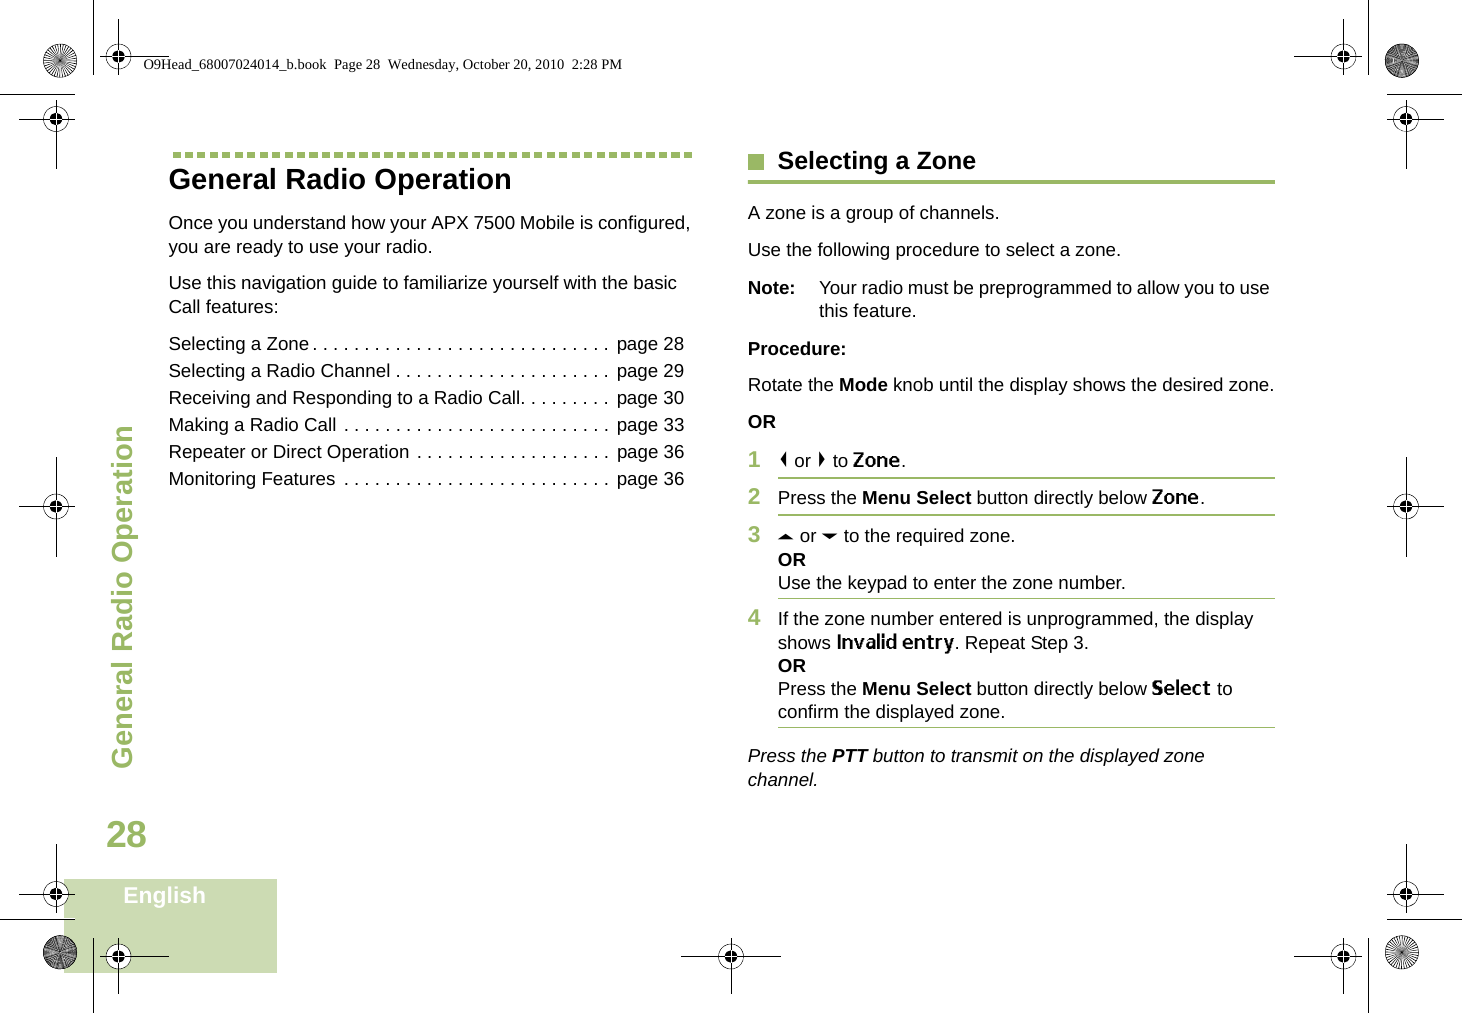 General Radio OperationEnglish28General Radio OperationOnce you understand how your APX 7500 Mobile is configured, you are ready to use your radio.Use this navigation guide to familiarize yourself with the basic Call features:Selecting a Zone. . . . . . . . . . . . . . . . . . . . . . . . . . . . . page 28Selecting a Radio Channel . . . . . . . . . . . . . . . . . . . . . page 29Receiving and Responding to a Radio Call. . . . . . . . . page 30Making a Radio Call . . . . . . . . . . . . . . . . . . . . . . . . . . page 33Repeater or Direct Operation . . . . . . . . . . . . . . . . . . . page 36Monitoring Features . . . . . . . . . . . . . . . . . . . . . . . . . . page 36Selecting a ZoneA zone is a group of channels.Use the following procedure to select a zone.Note: Your radio must be preprogrammed to allow you to use this feature.Procedure:Rotate the Mode knob until the display shows the desired zone.OR1&lt; or &gt; to Zone.2Press the Menu Select button directly below Zone.3U or D to the required zone.ORUse the keypad to enter the zone number.4If the zone number entered is unprogrammed, the display shows Invalid entry. Repeat Step 3.ORPress the Menu Select button directly below Select to confirm the displayed zone. Press the PTT button to transmit on the displayed zone channel.O9Head_68007024014_b.book  Page 28  Wednesday, October 20, 2010  2:28 PM